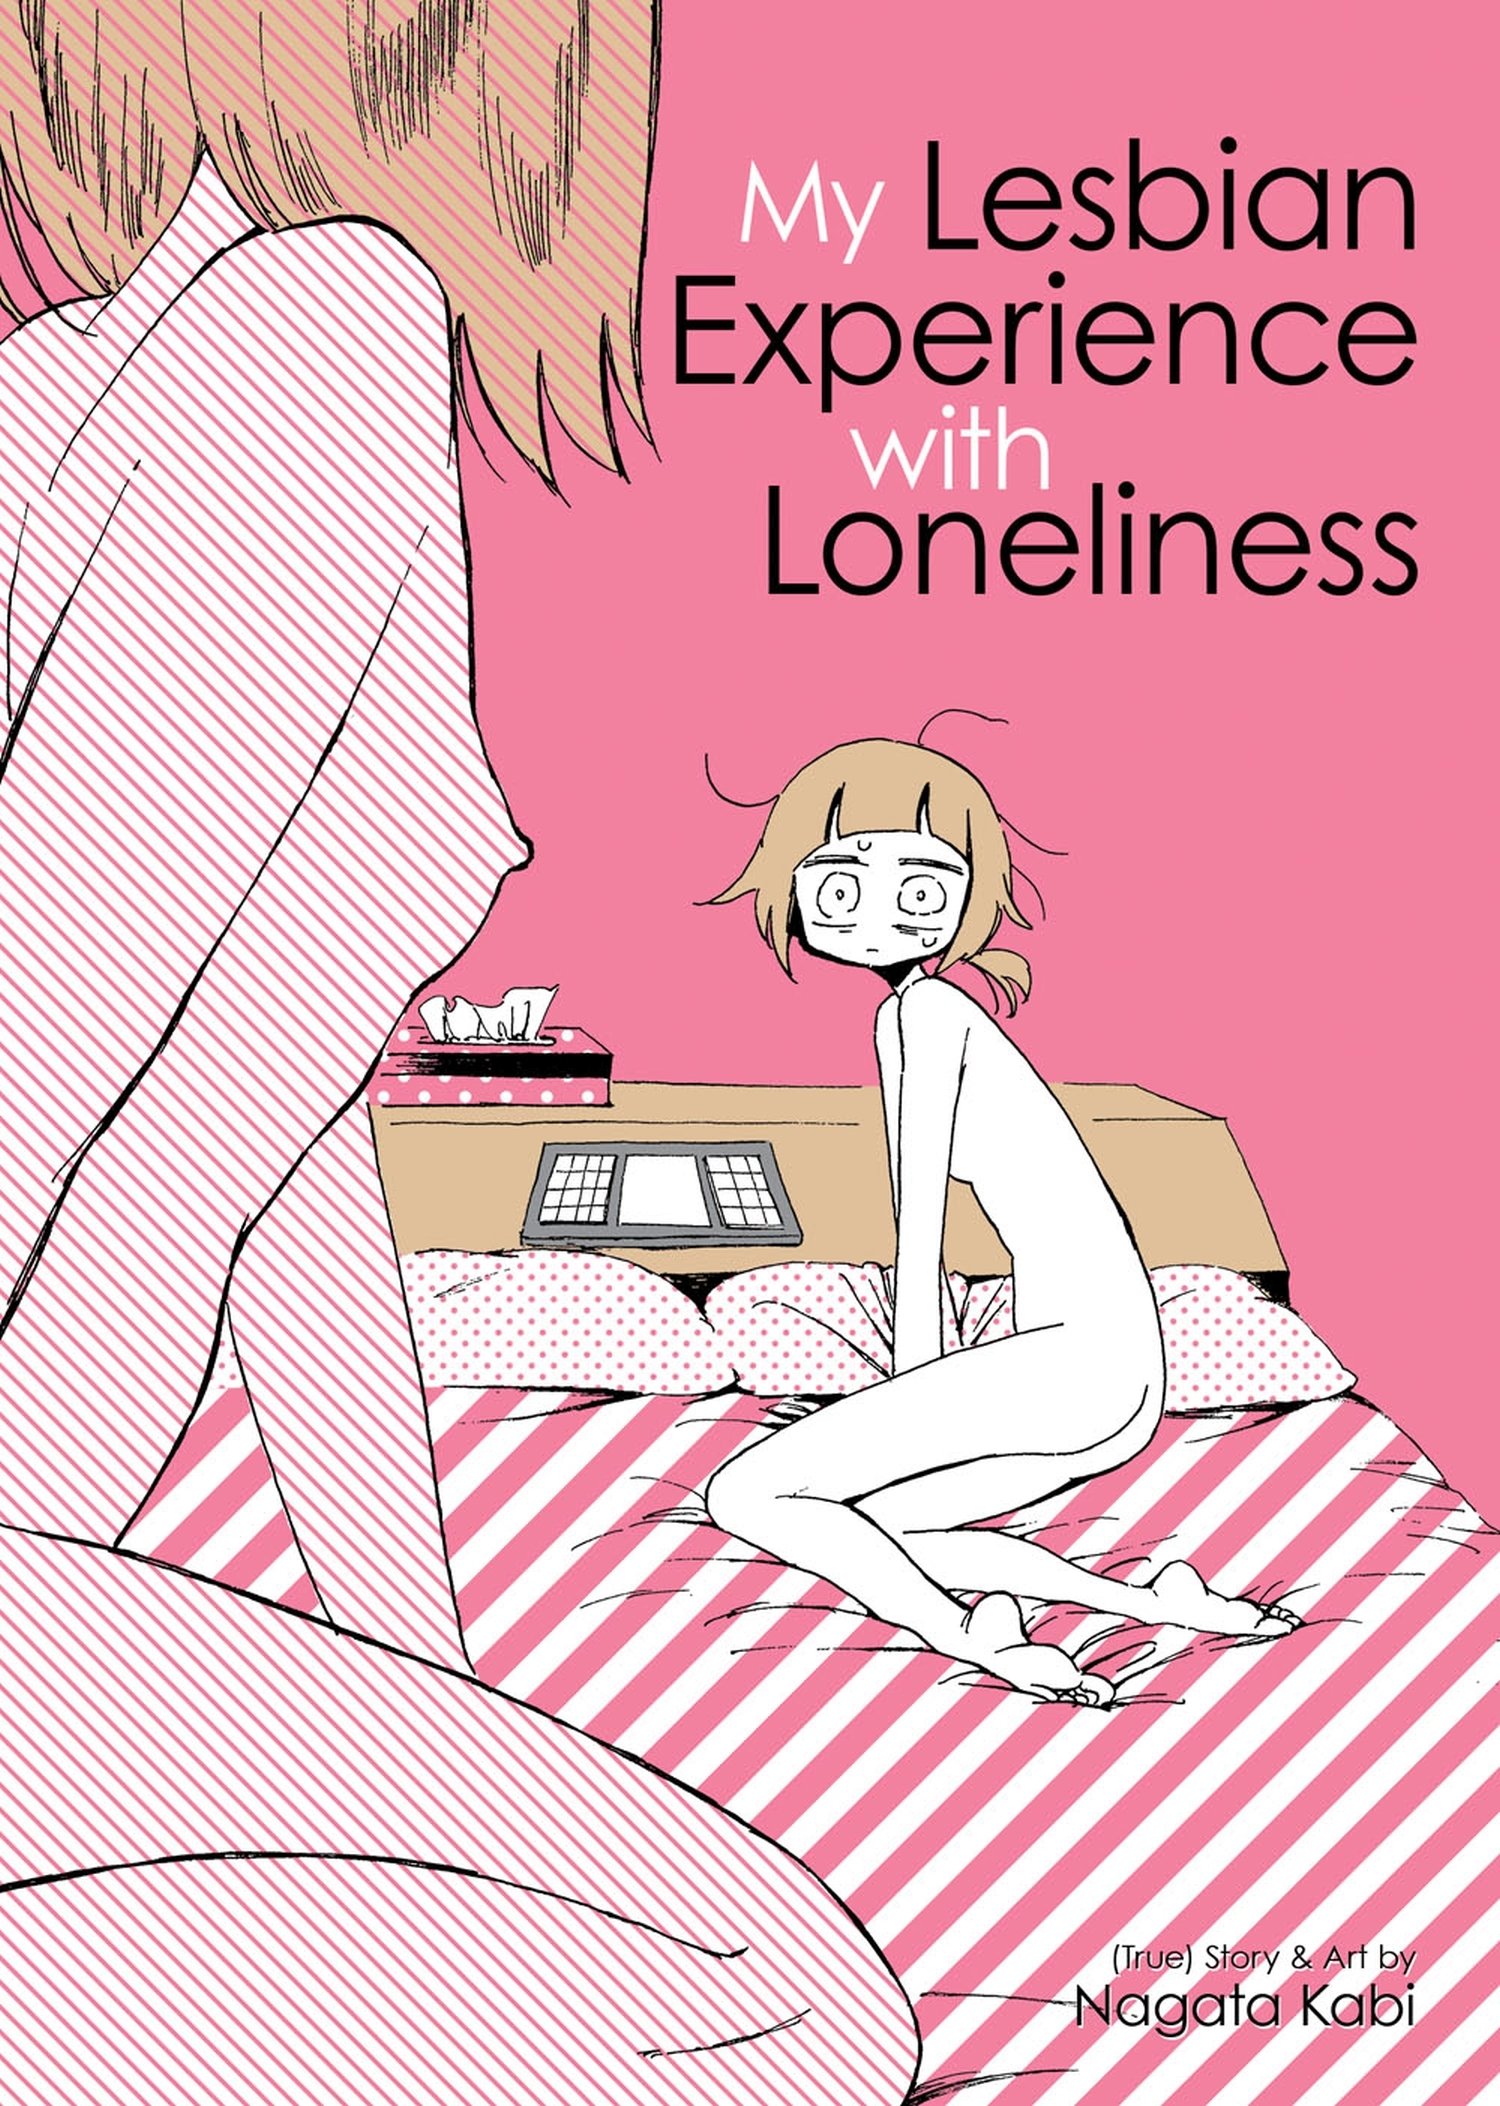 My Lesbian Experience with Loneliness | Nagata Kabi